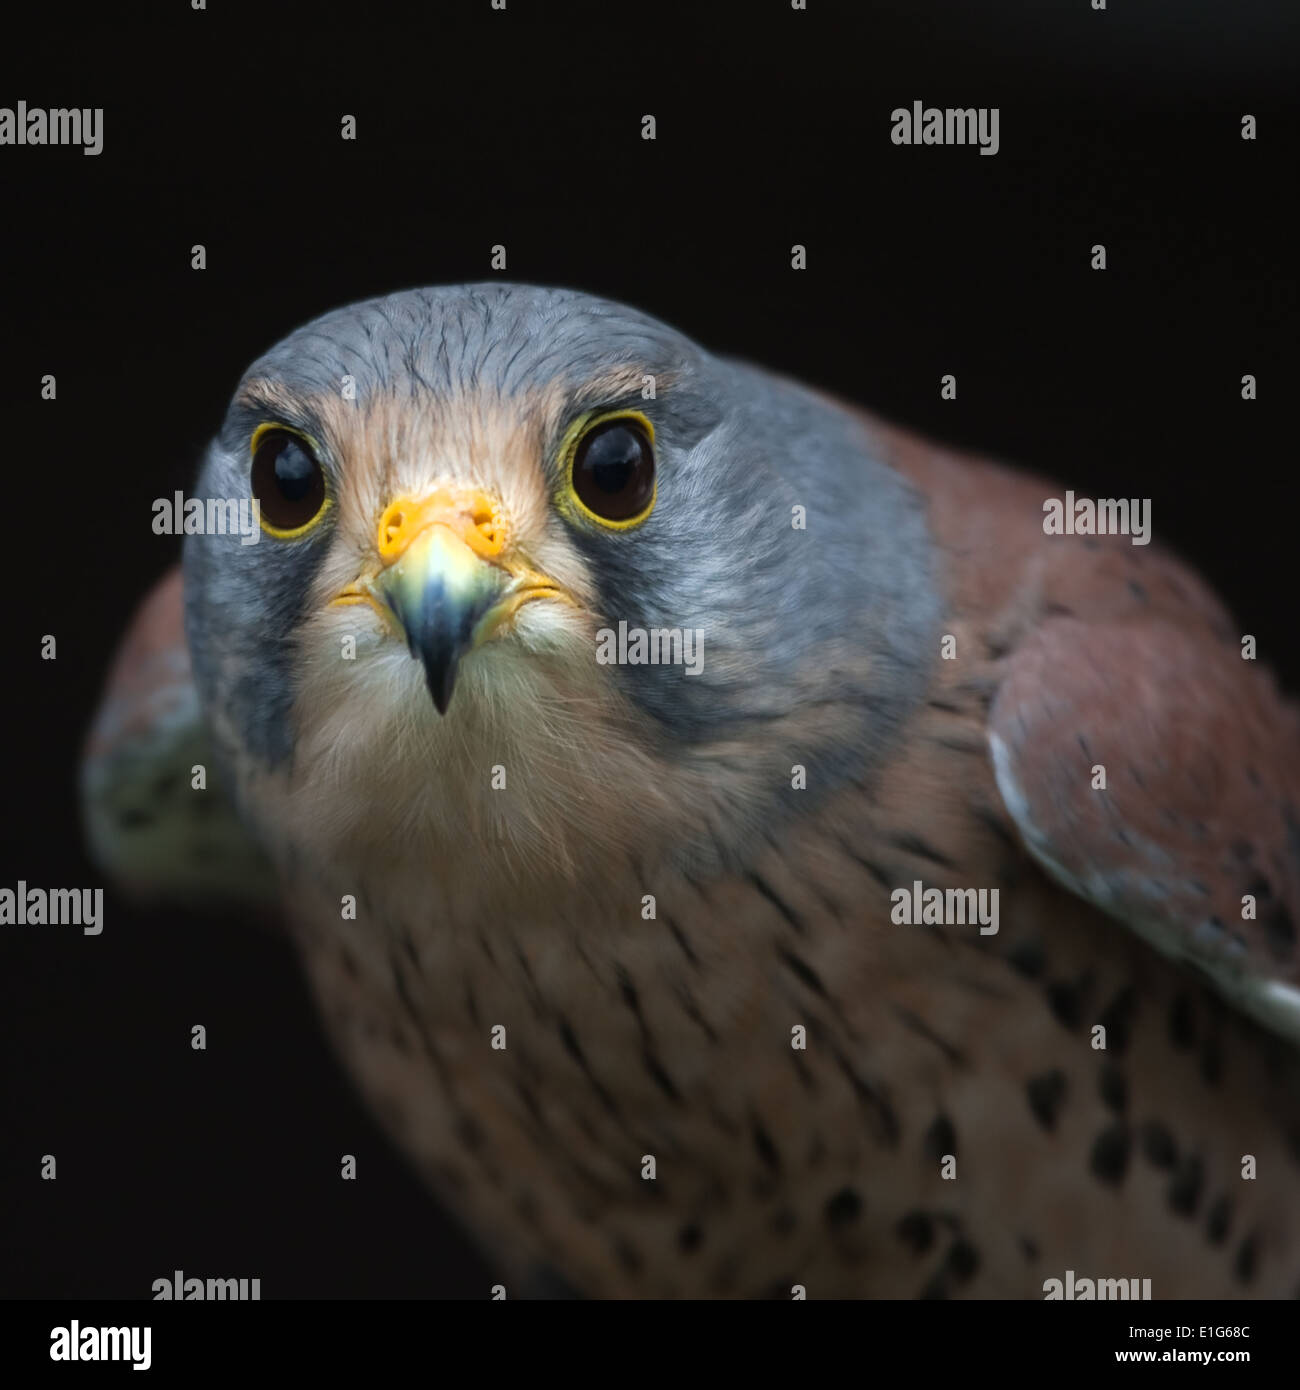 Kestrel headshot taken in controlled conditions Stock Photo